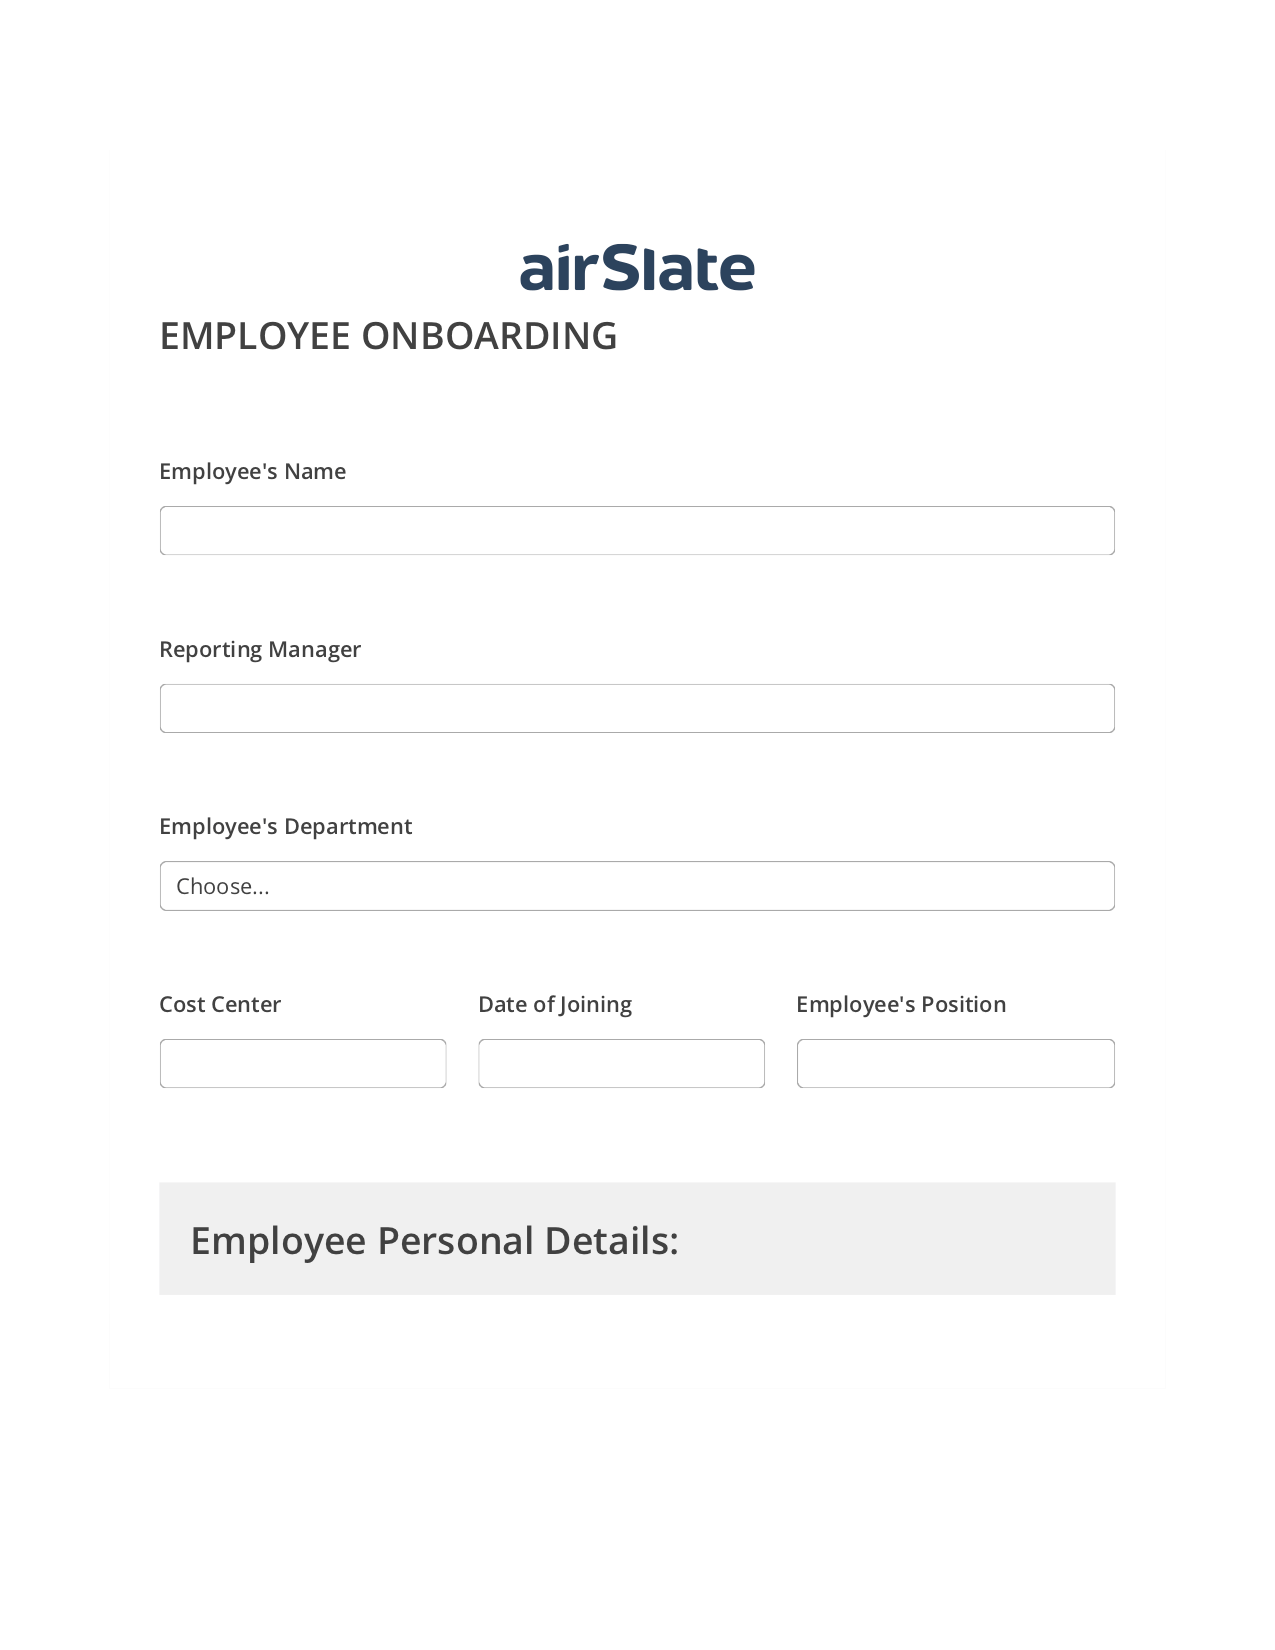 Employee Onboarding Workflow Pre-fill from Google Sheet Dropdown Options Bot, Email Notification Bot, Export to WebMerge Bot